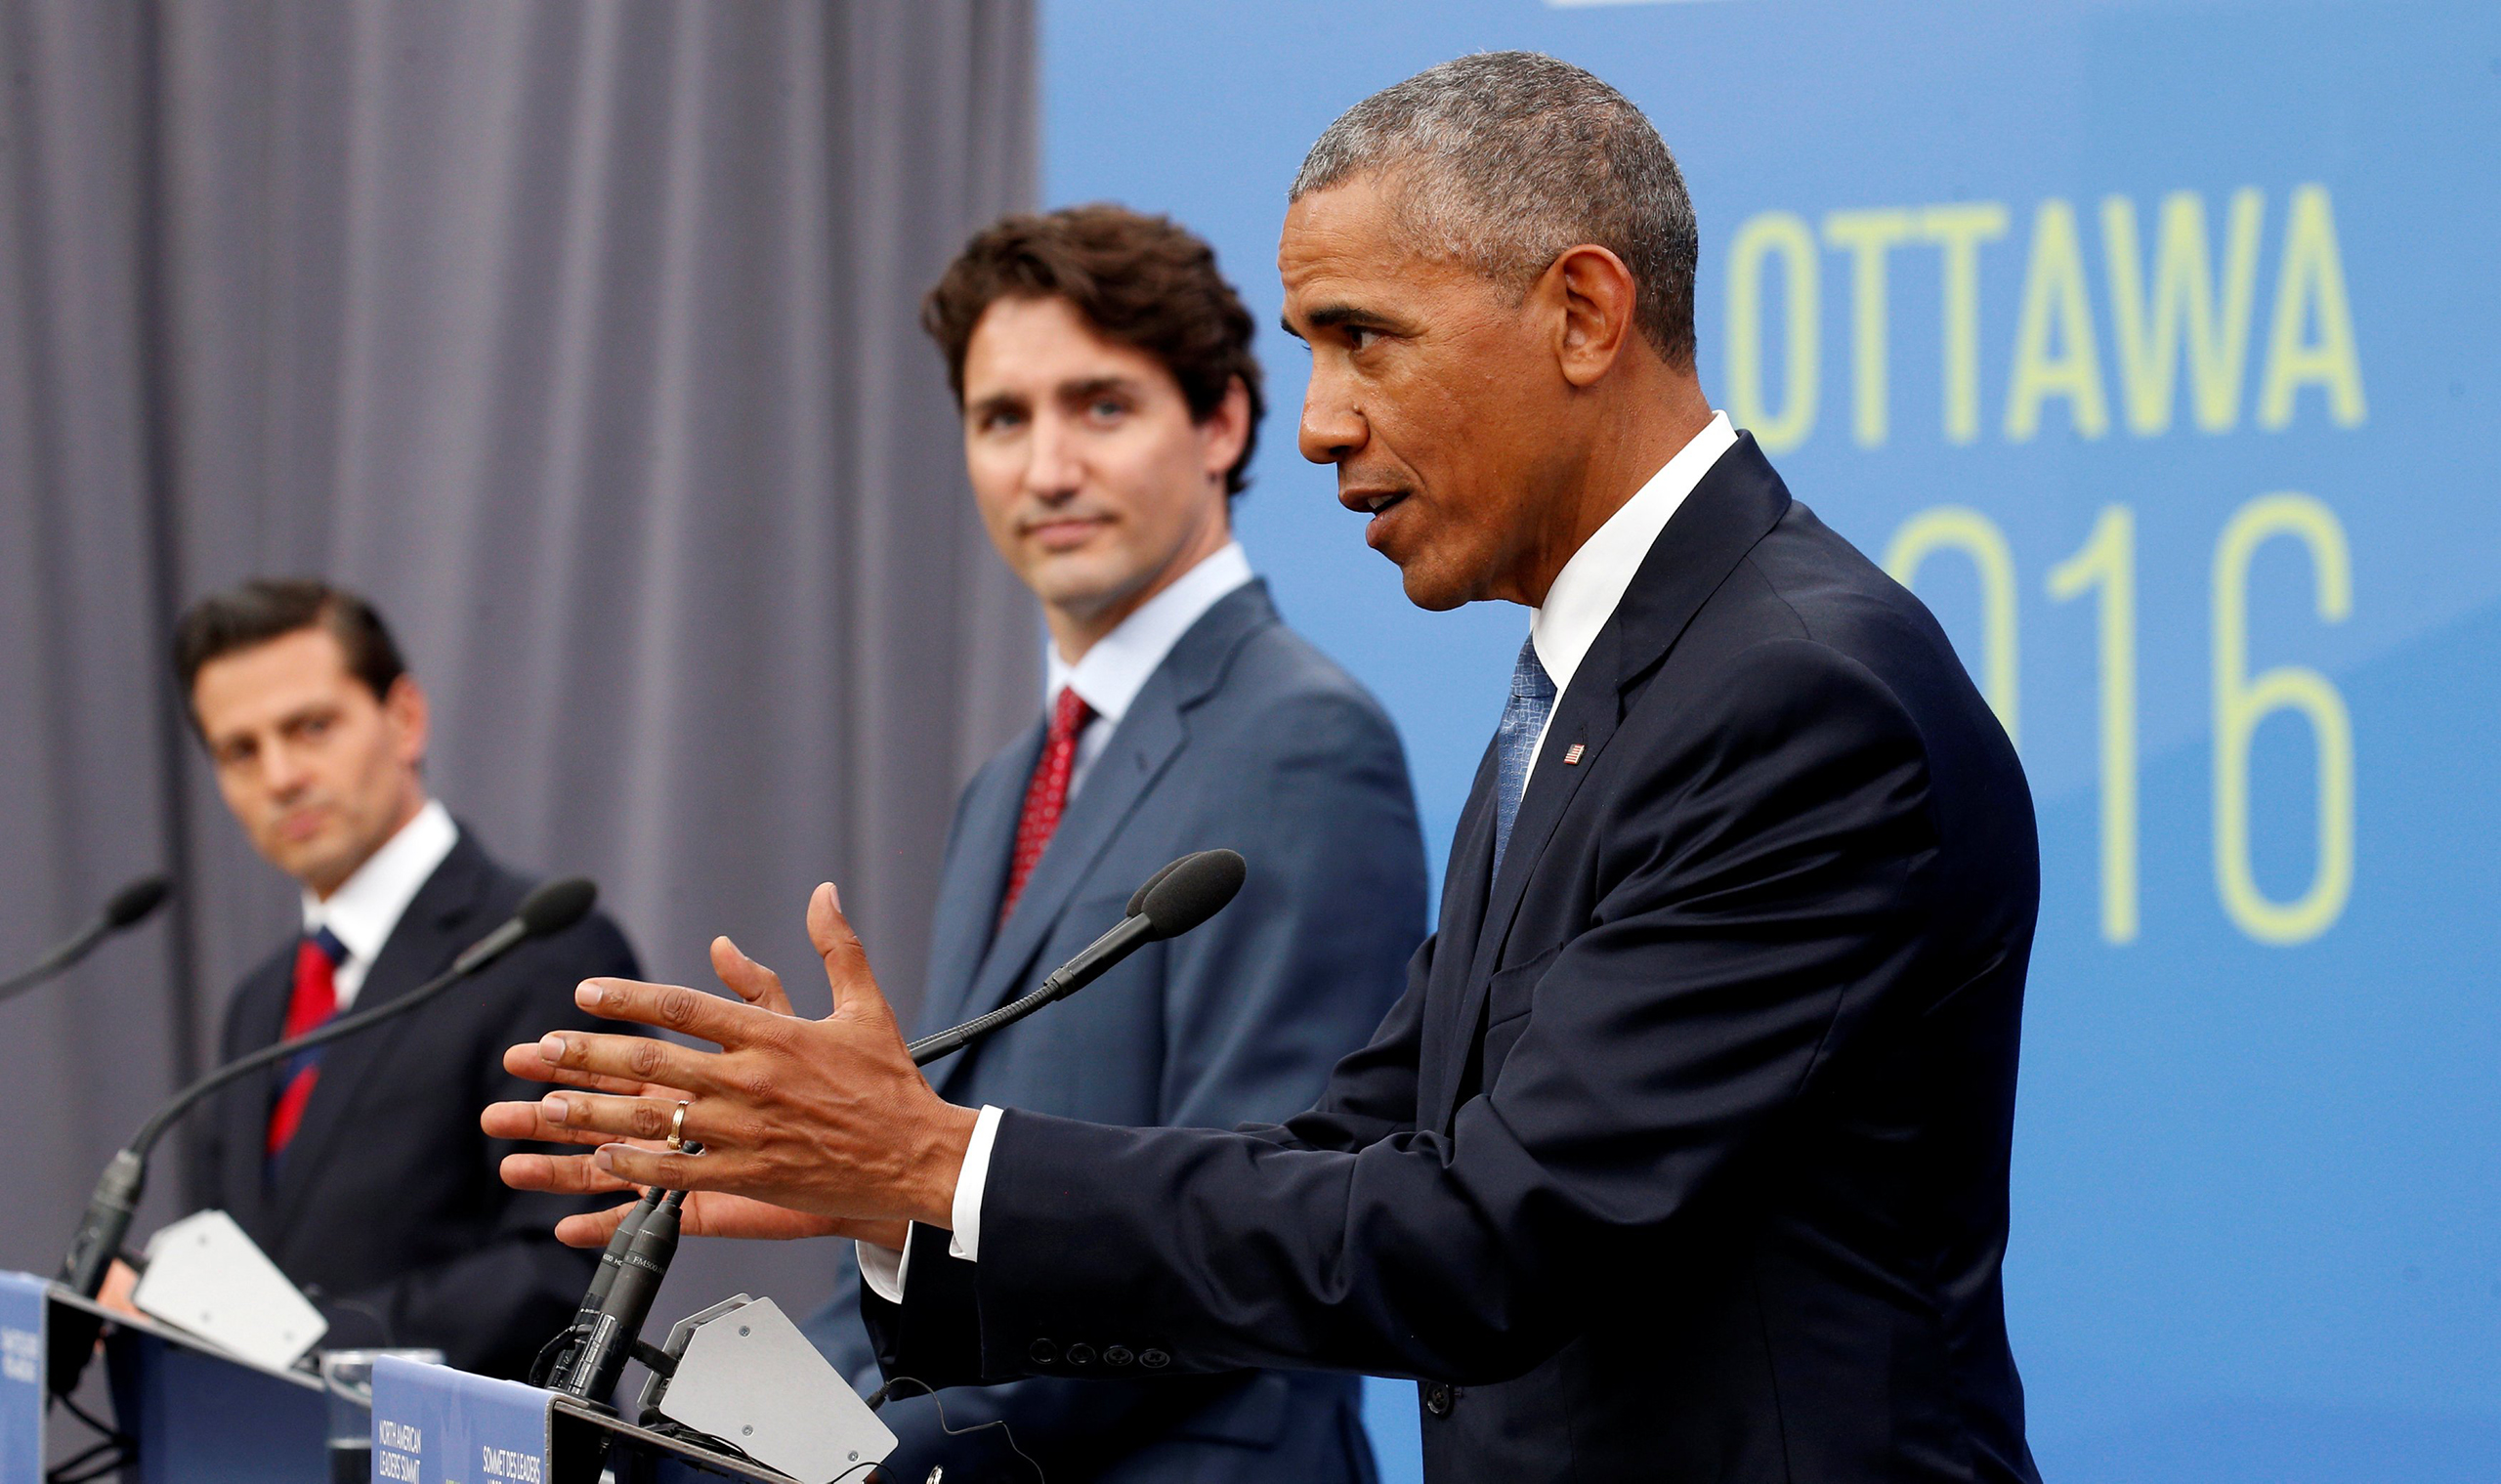 Mexican President Enrique Pena Nieto, (L) Canadian Prime Minister Justin Trudeau (C) and U.S. President Barack Obama take part in a news conference during the North American Leaders' Summit in Ottawa, Canada, on June 29, 2016. (Kevin Lamarque—Reuters)